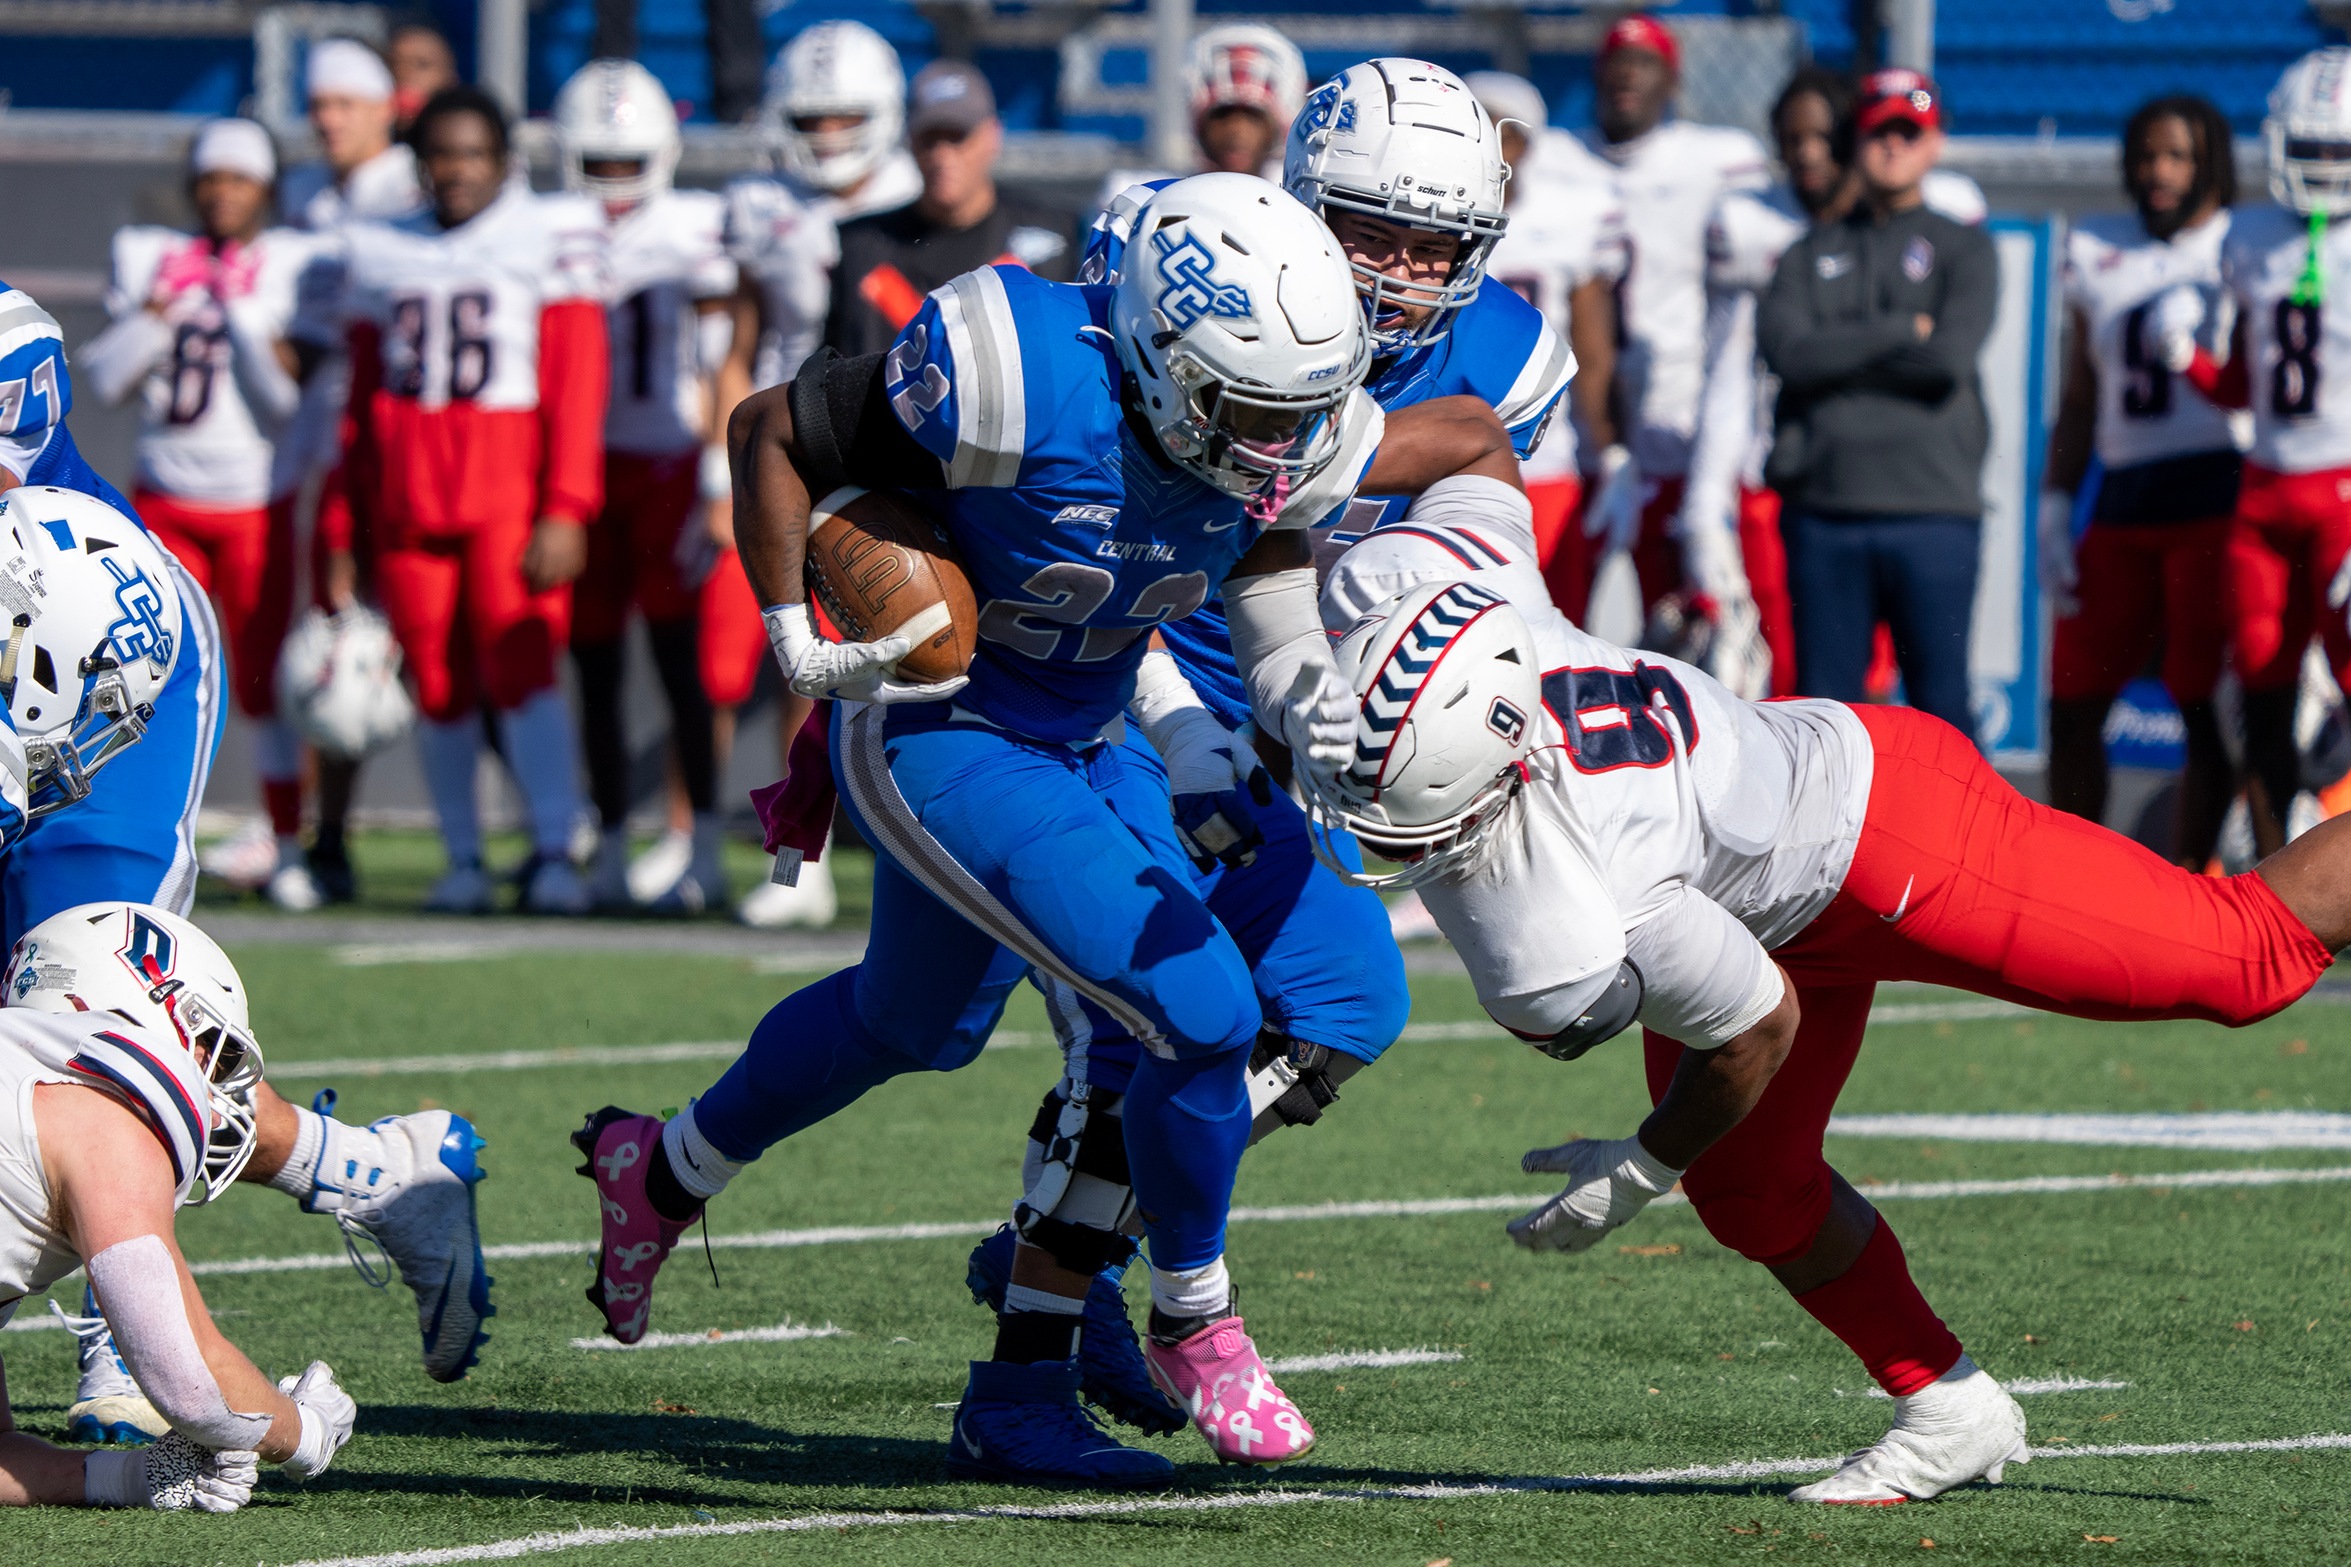 Nas Smith ran for 91 yards and had three catches for 41 more in the Blue Devils October 22, 2022 game versus Duquesne. (Photo: Steve McLaughlin)